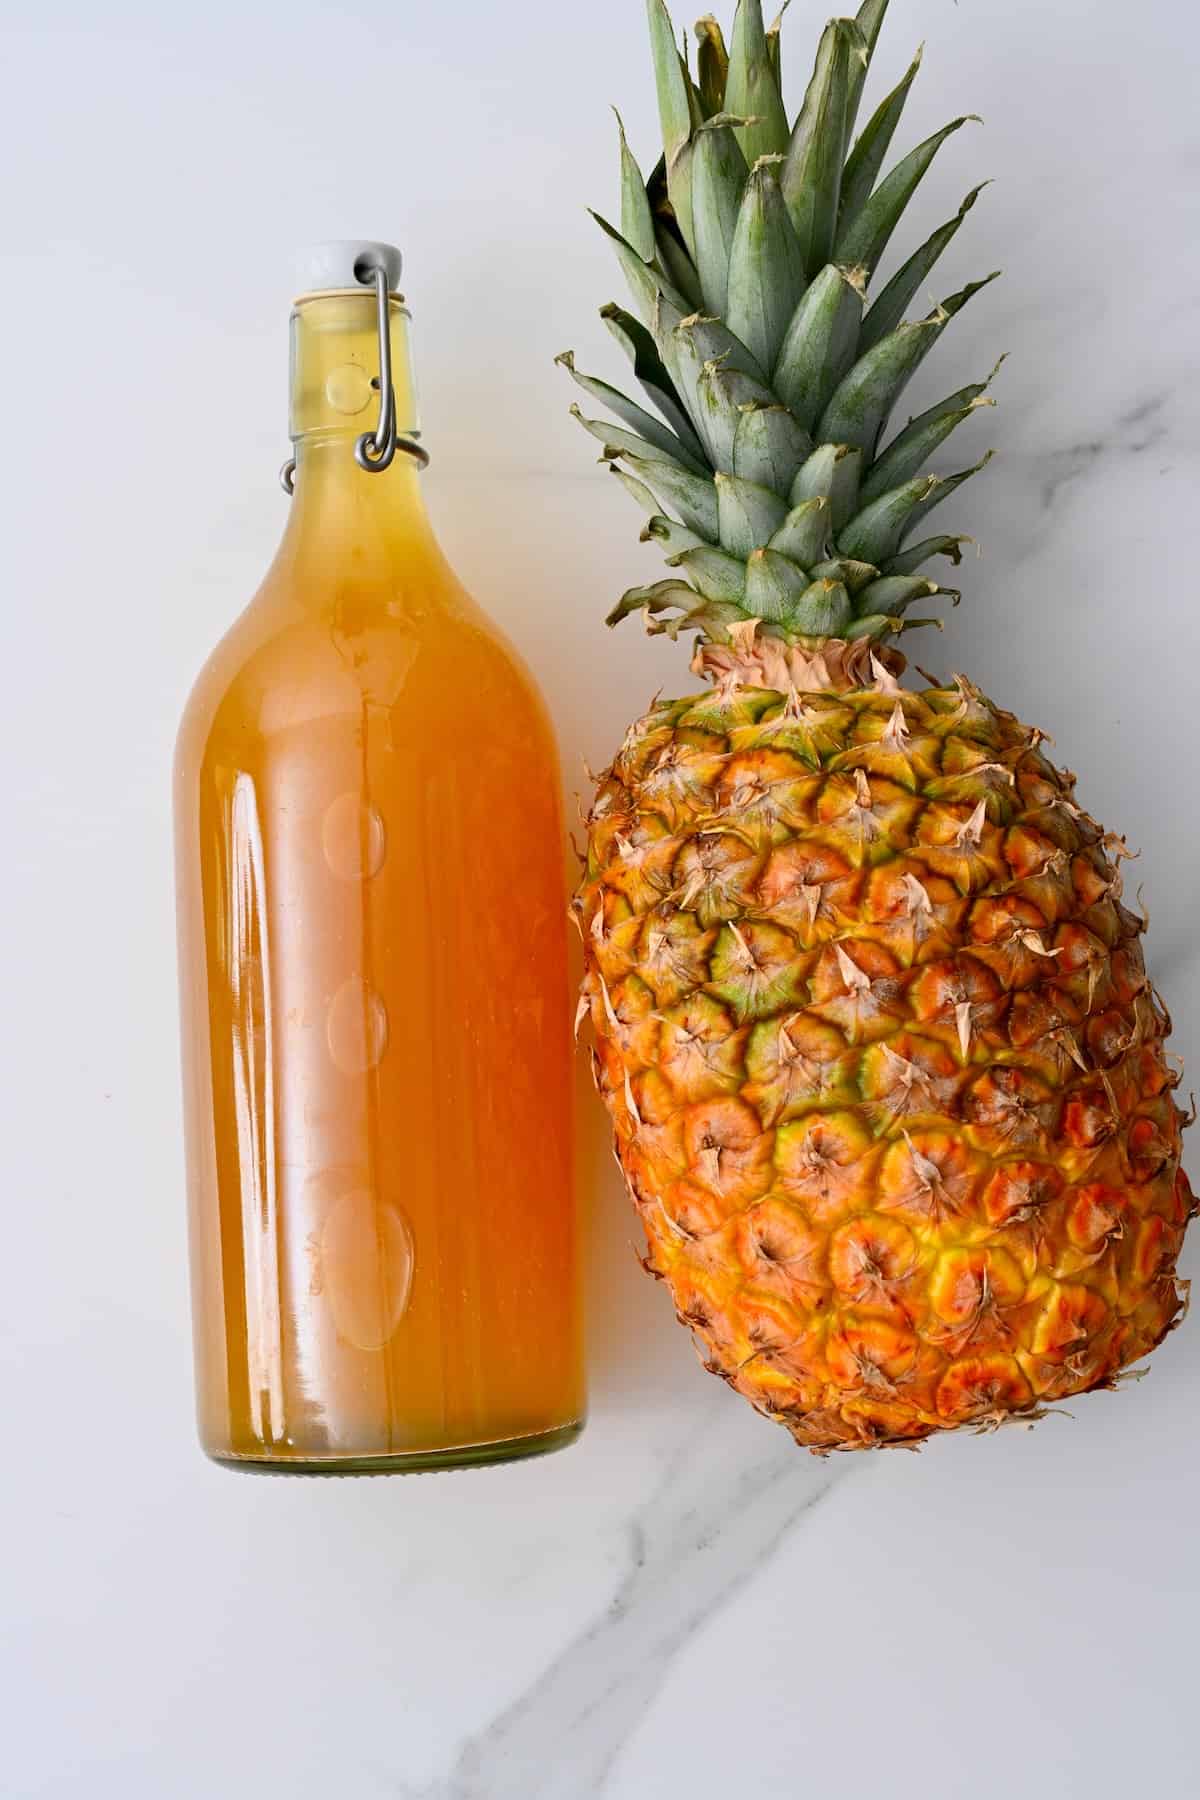 A bottle of tepache next to a pineapple laying on a flat surface